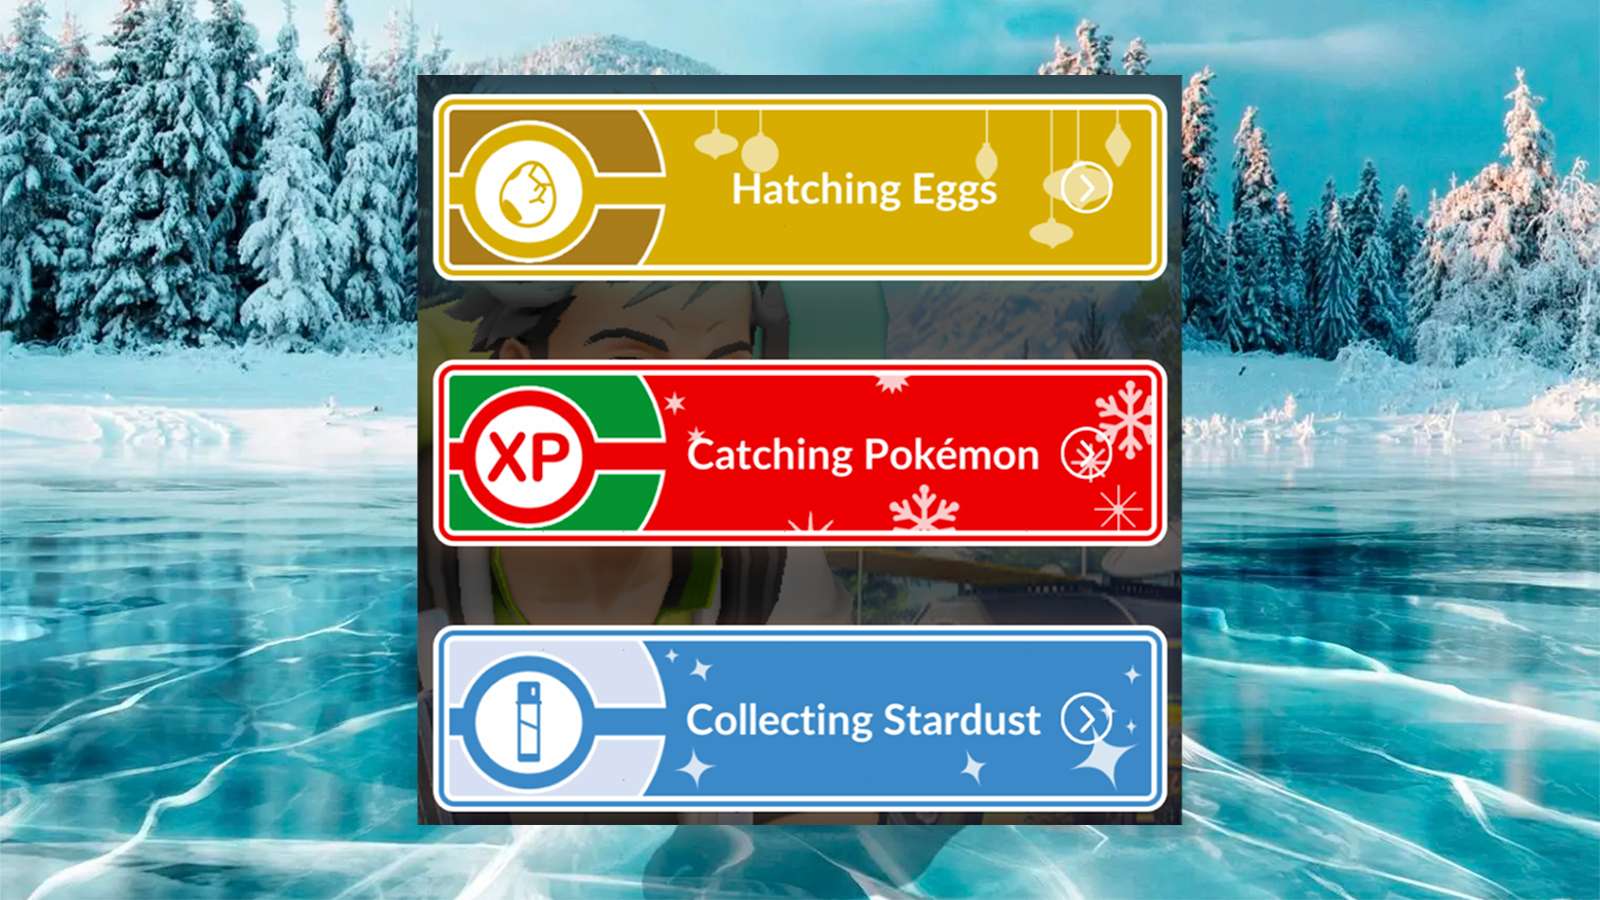 Choose a path options in Pokemon Go Winter Wishes Timed Research